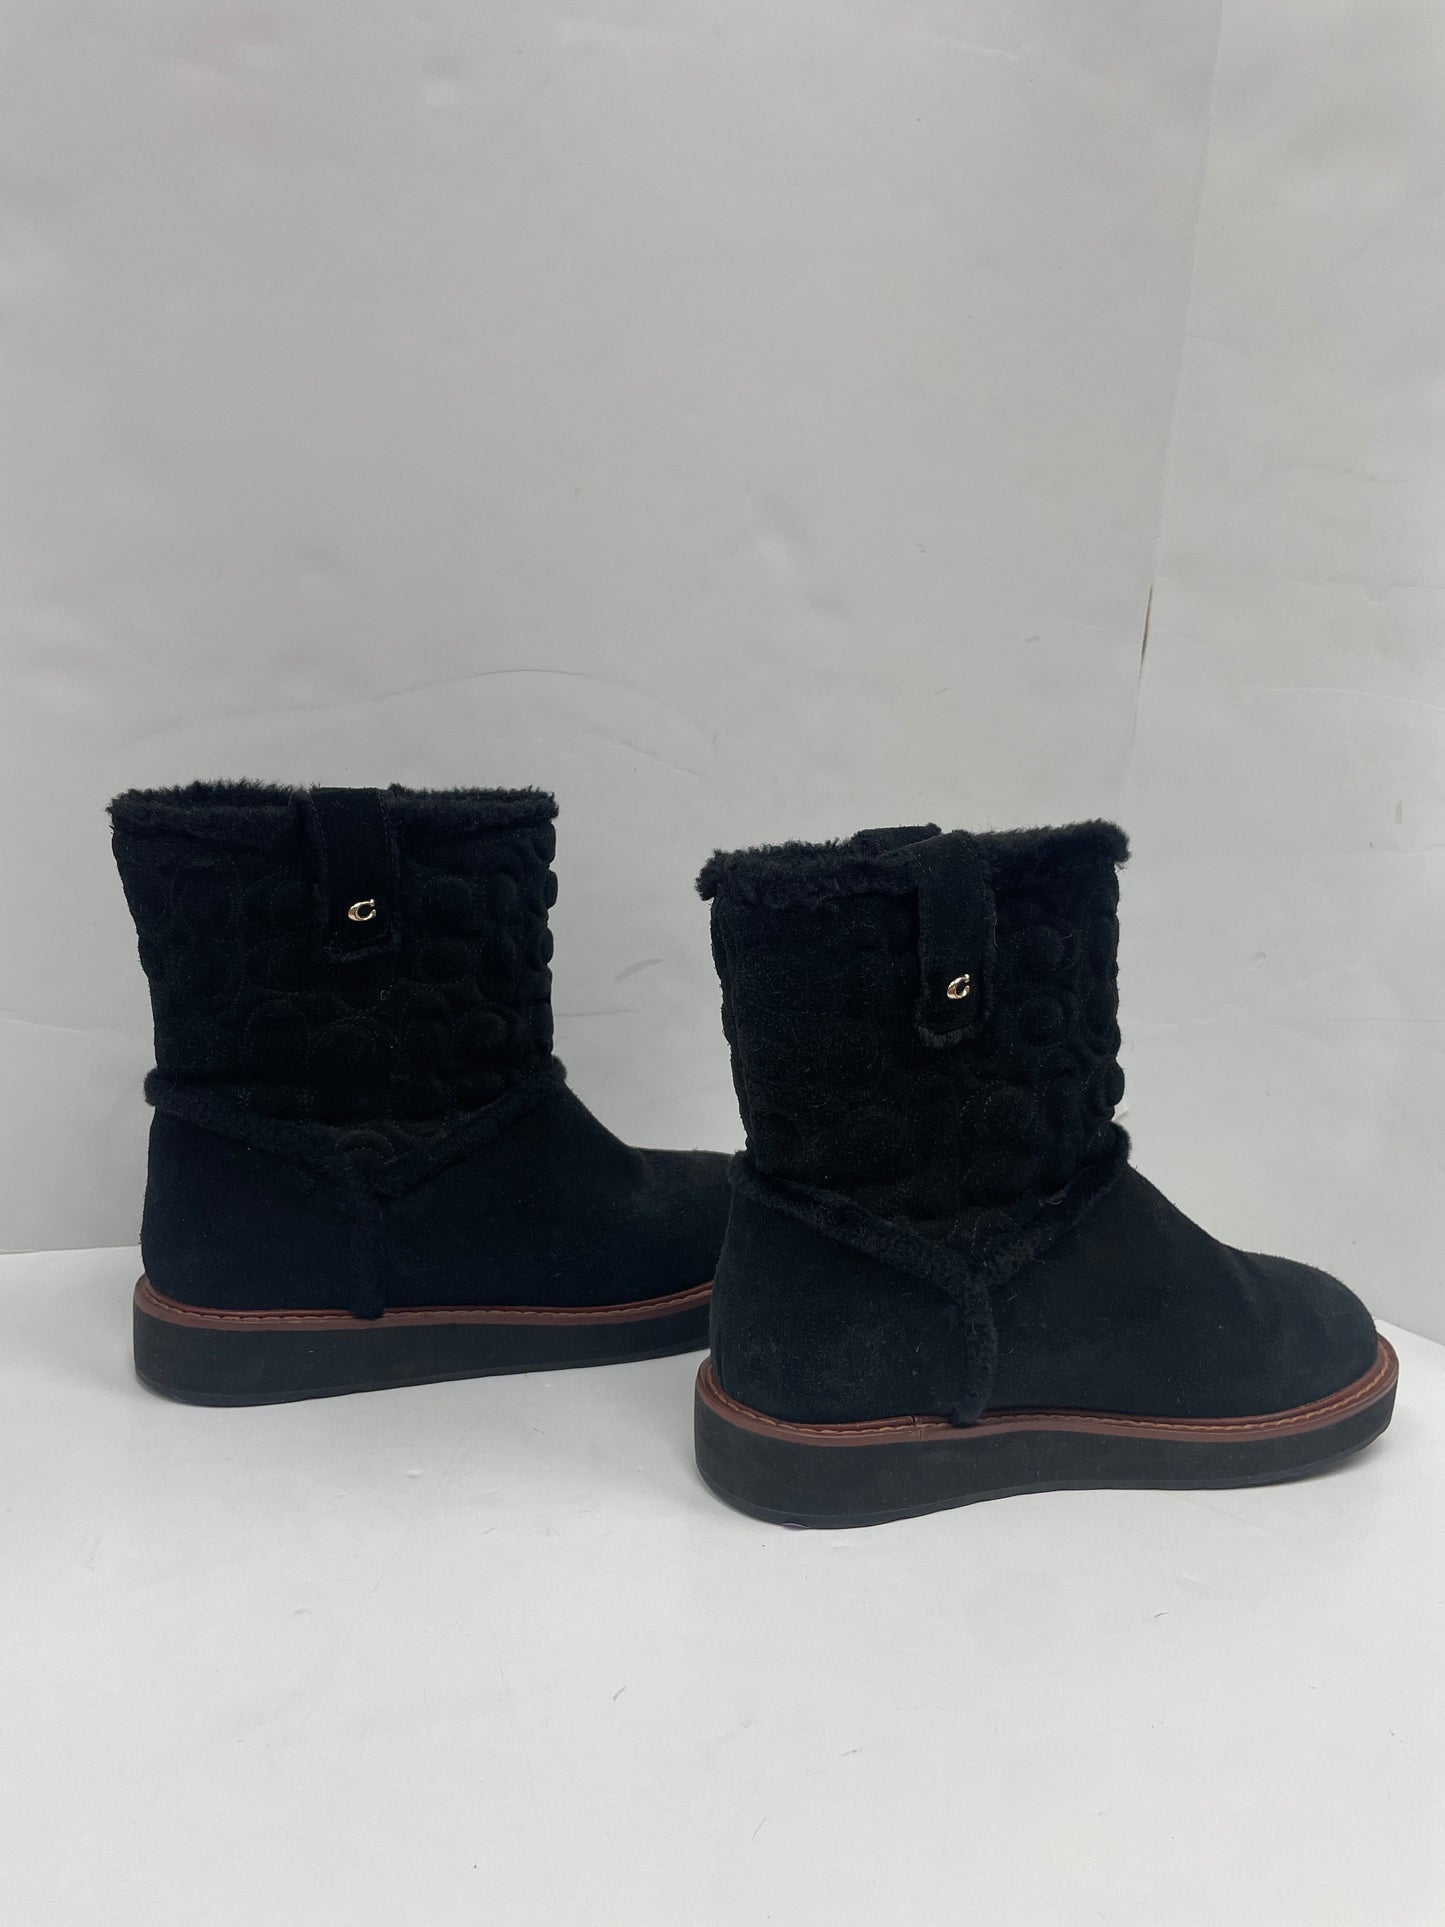 Boots Designer By Coach  Size: 7.5